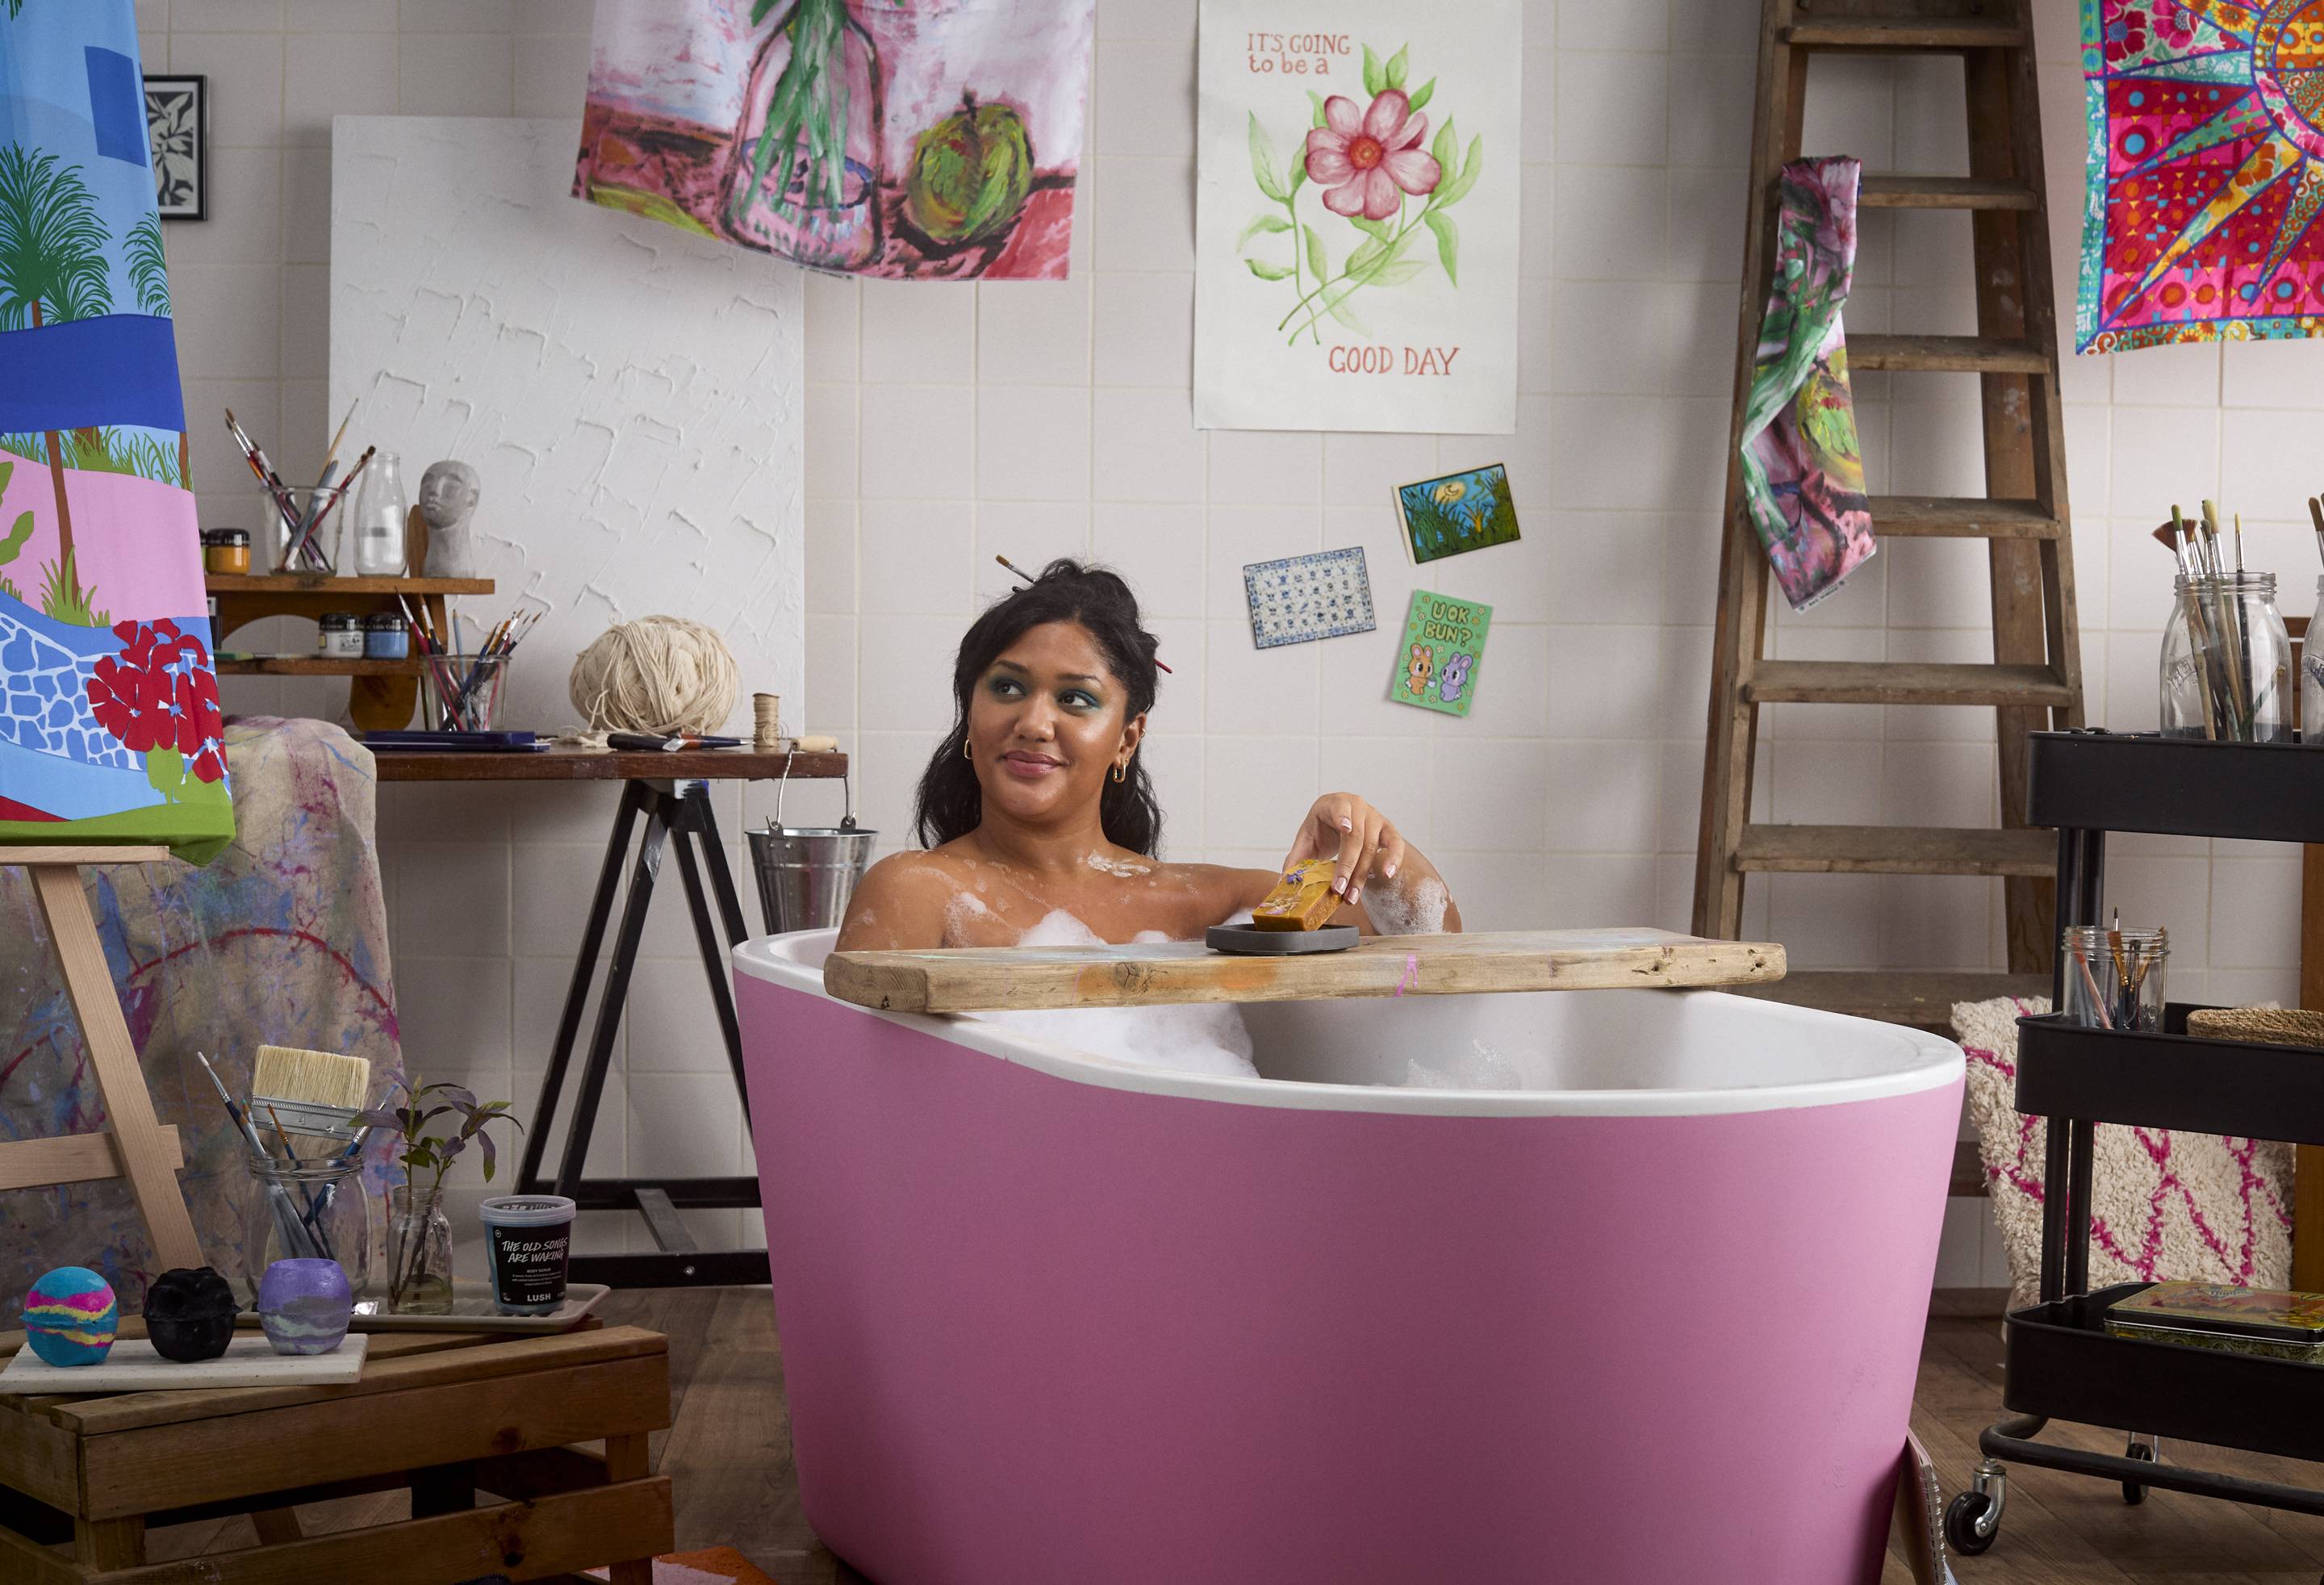 The image shows the model in a pink bathtub in the middle of an art studio. 